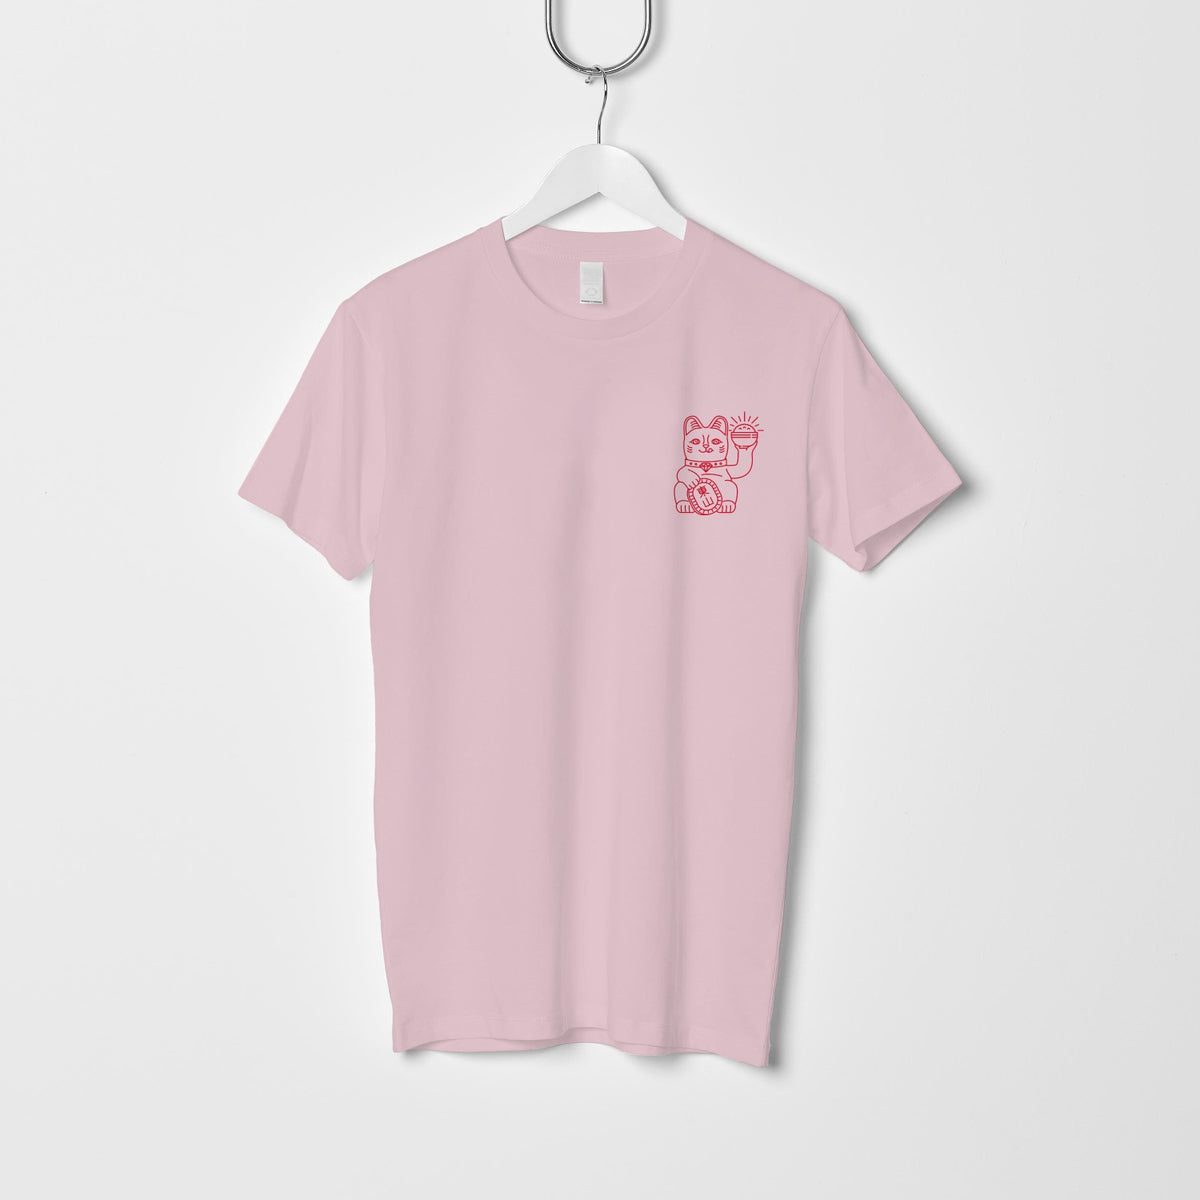 Eastern Hill General Supplies Land of the Ricing Son Tee - Pink/Red